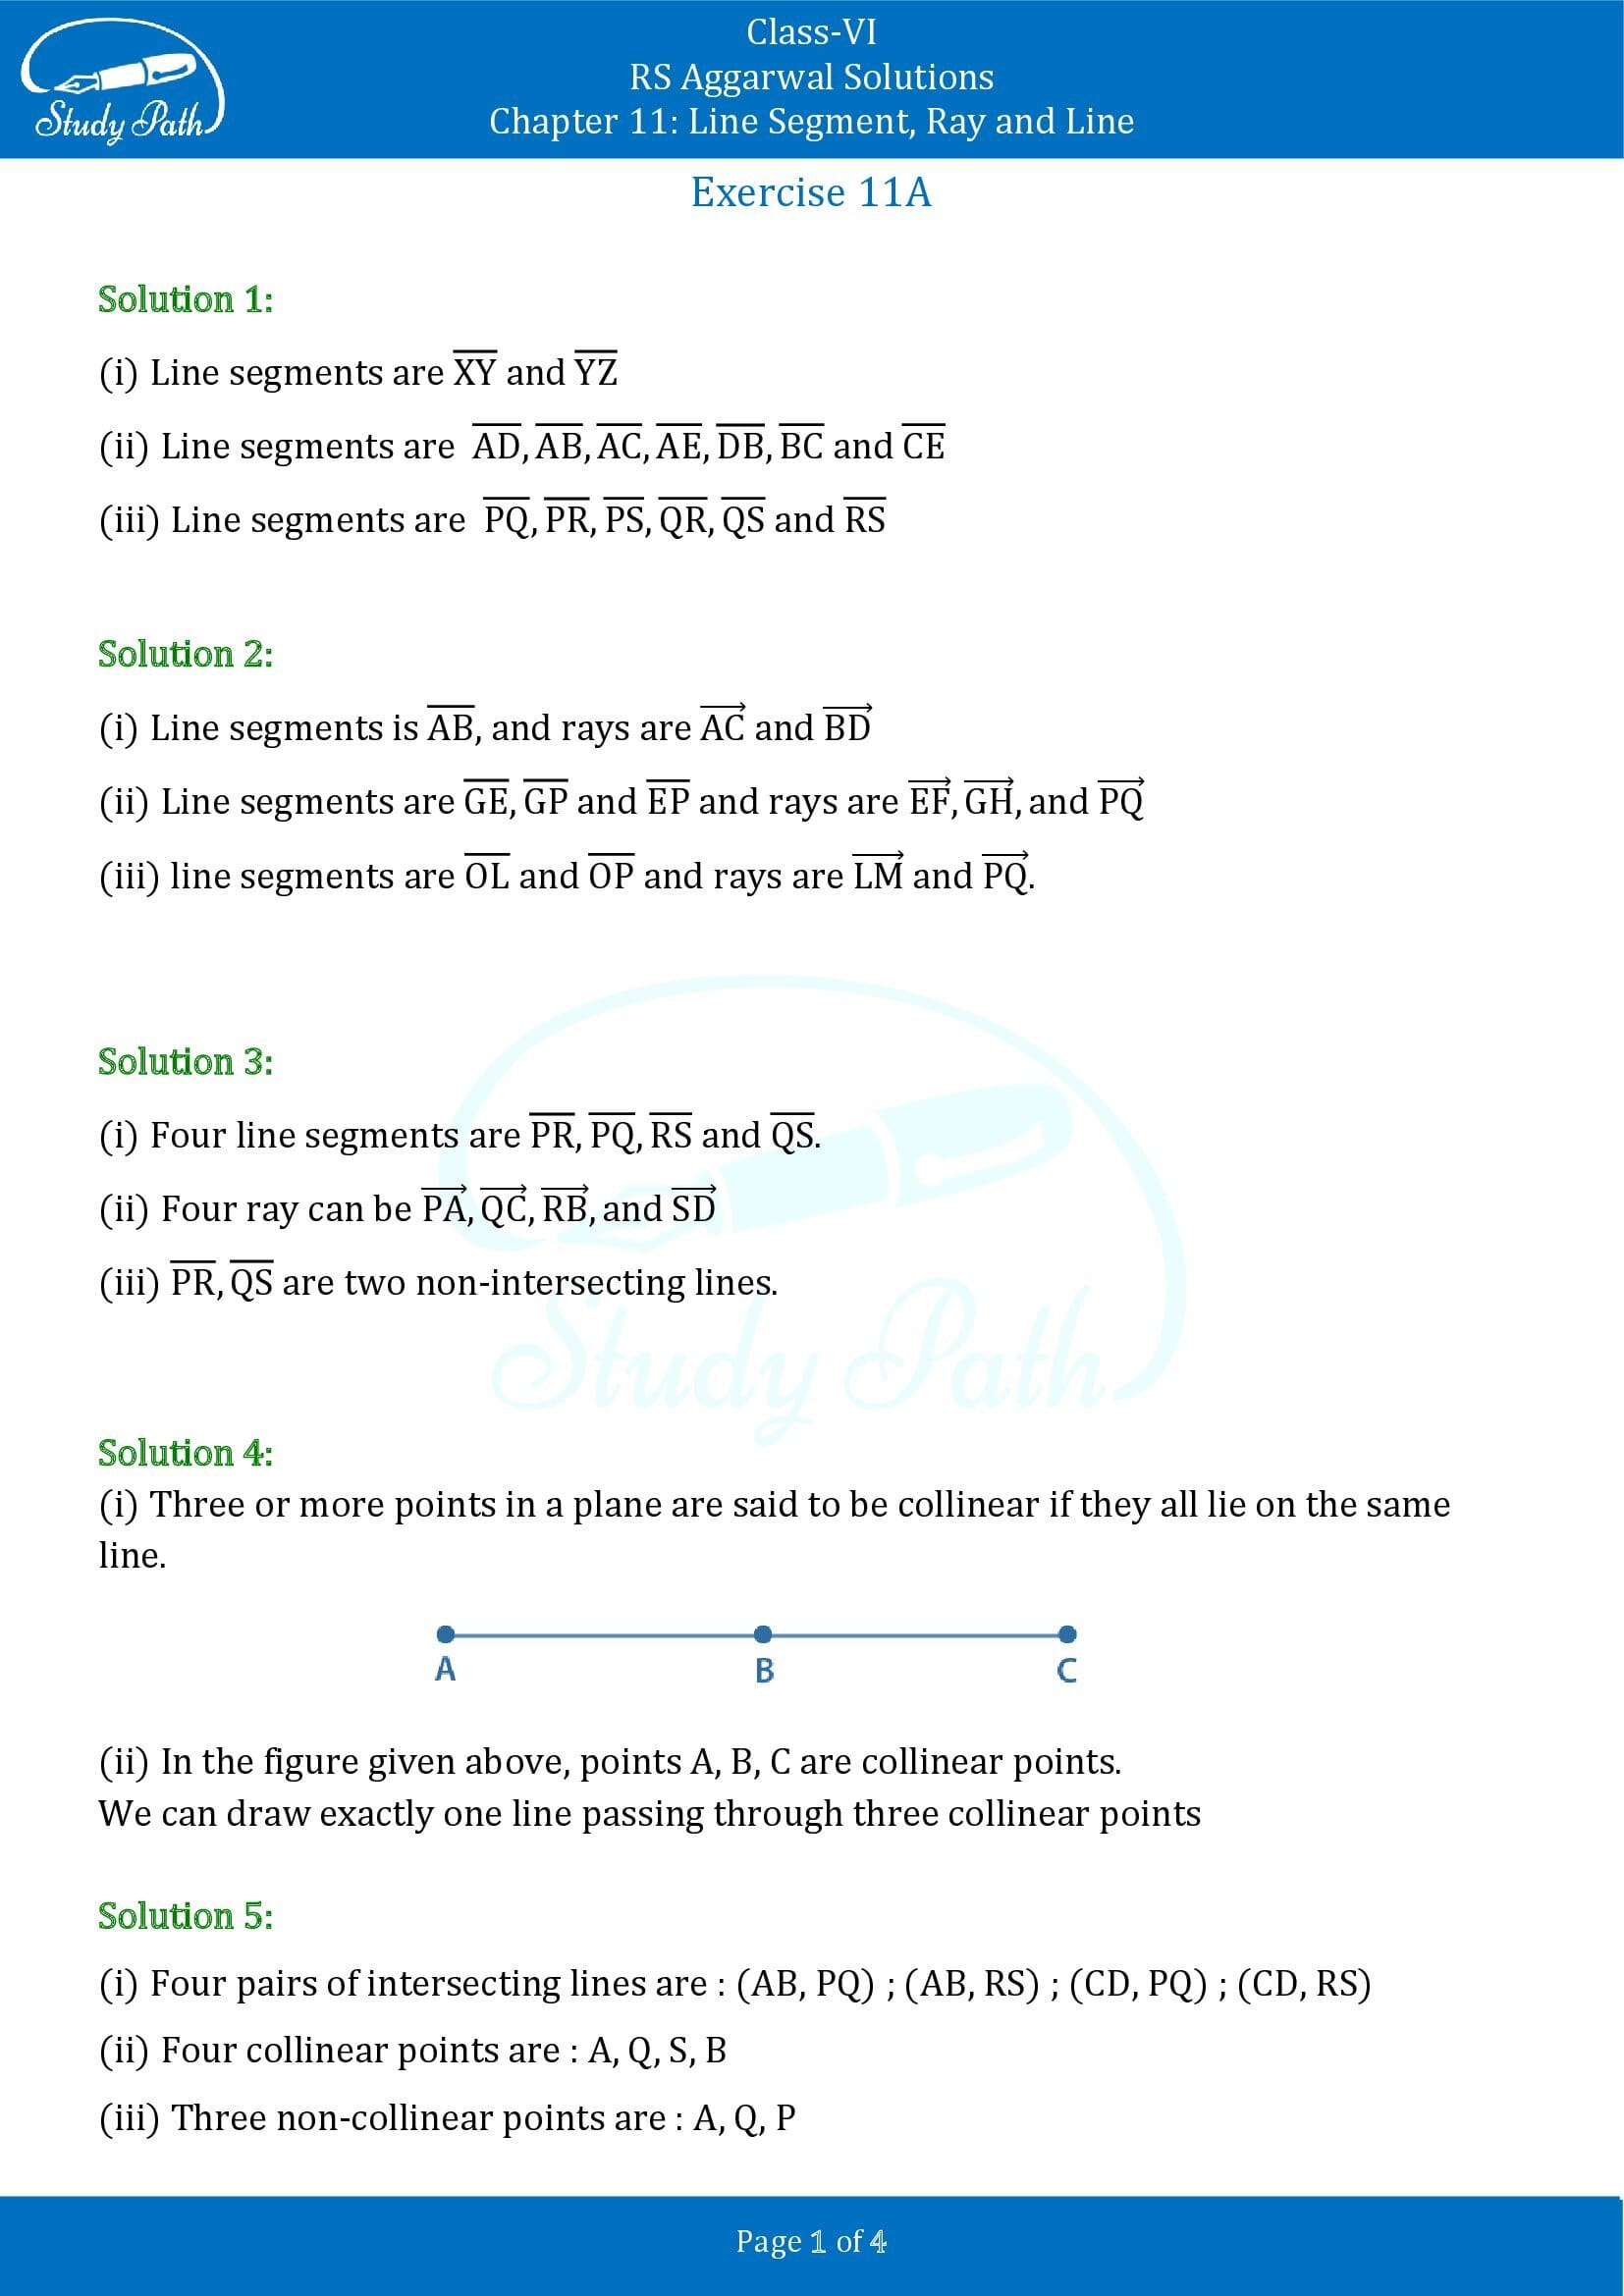 RS Aggarwal Solutions Class 6 Chapter 11 Line Segment Ray and Line Exercise 11A 0001